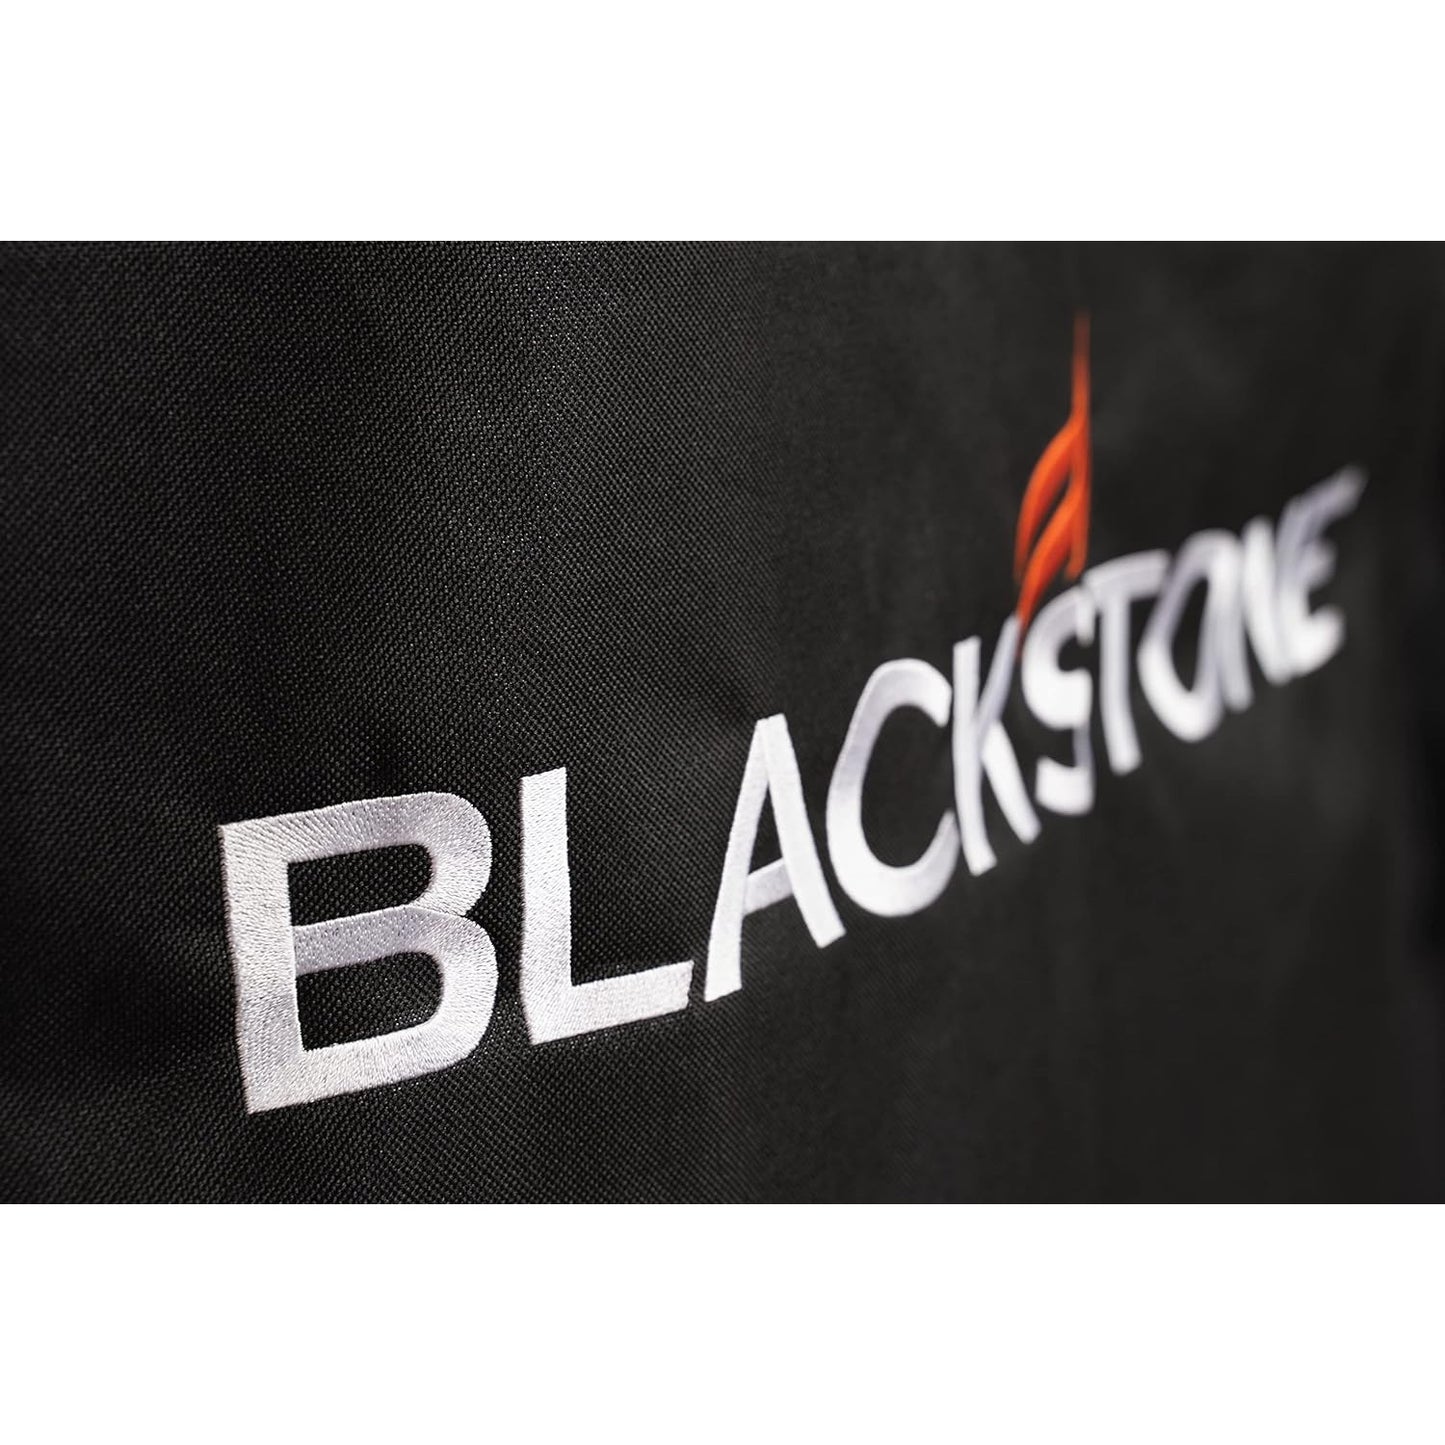 Blackstone Dust Cover for 36" Griddle